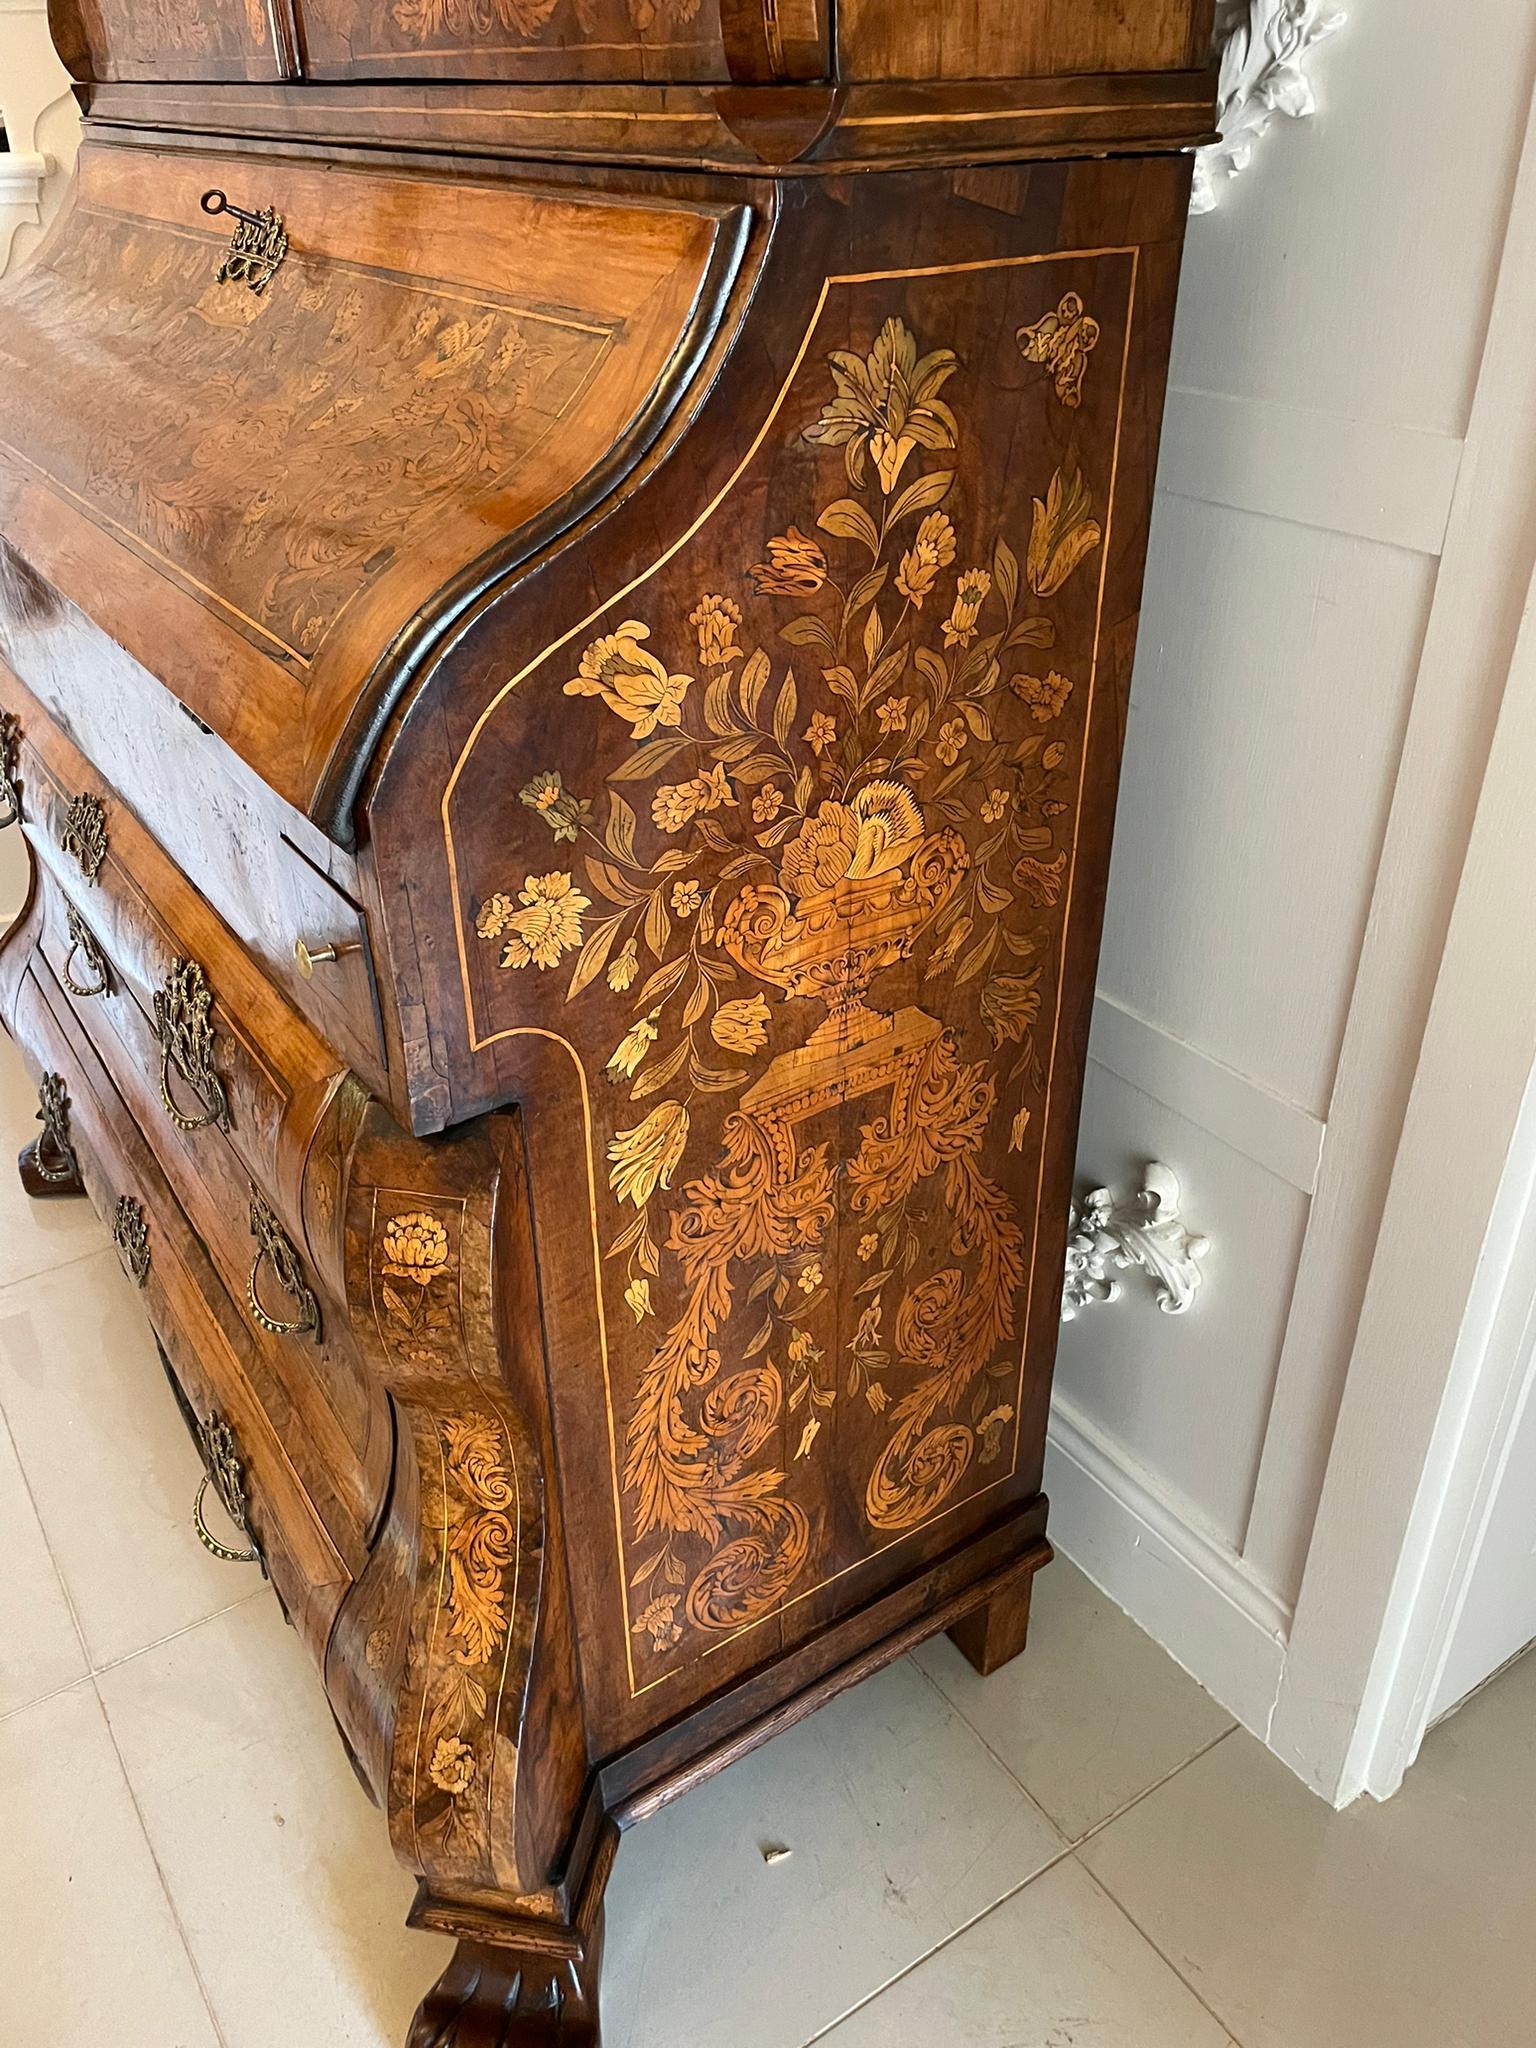 Outstanding Quality Antique Dutch Marquetry Inlaid Burr Walnut Bureau Bookcase In Good Condition For Sale In Suffolk, GB